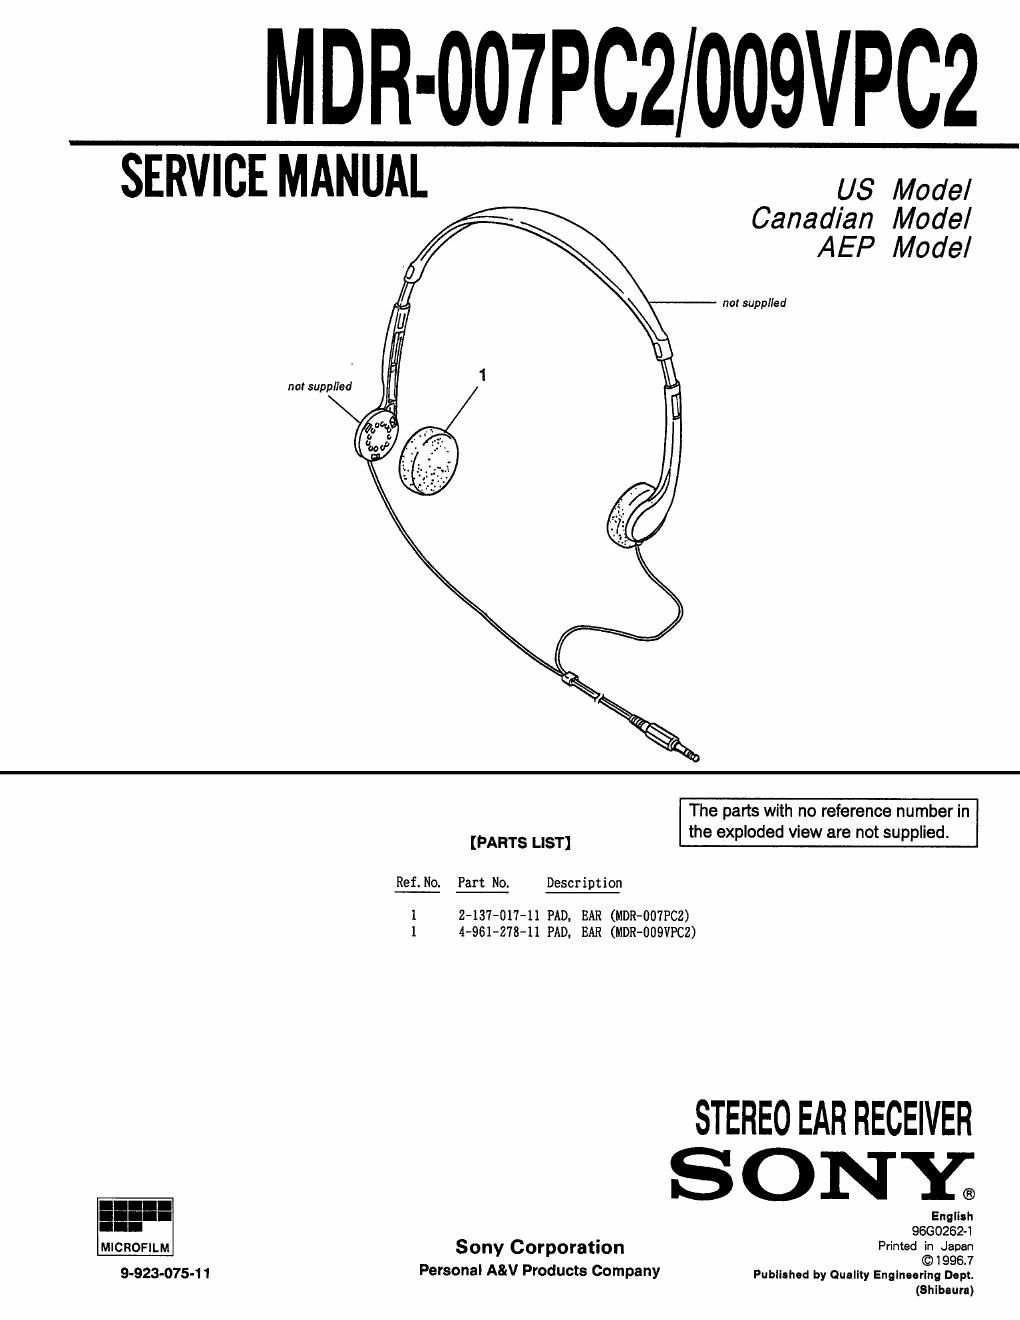 sony mdr 007 pc 2 service manual